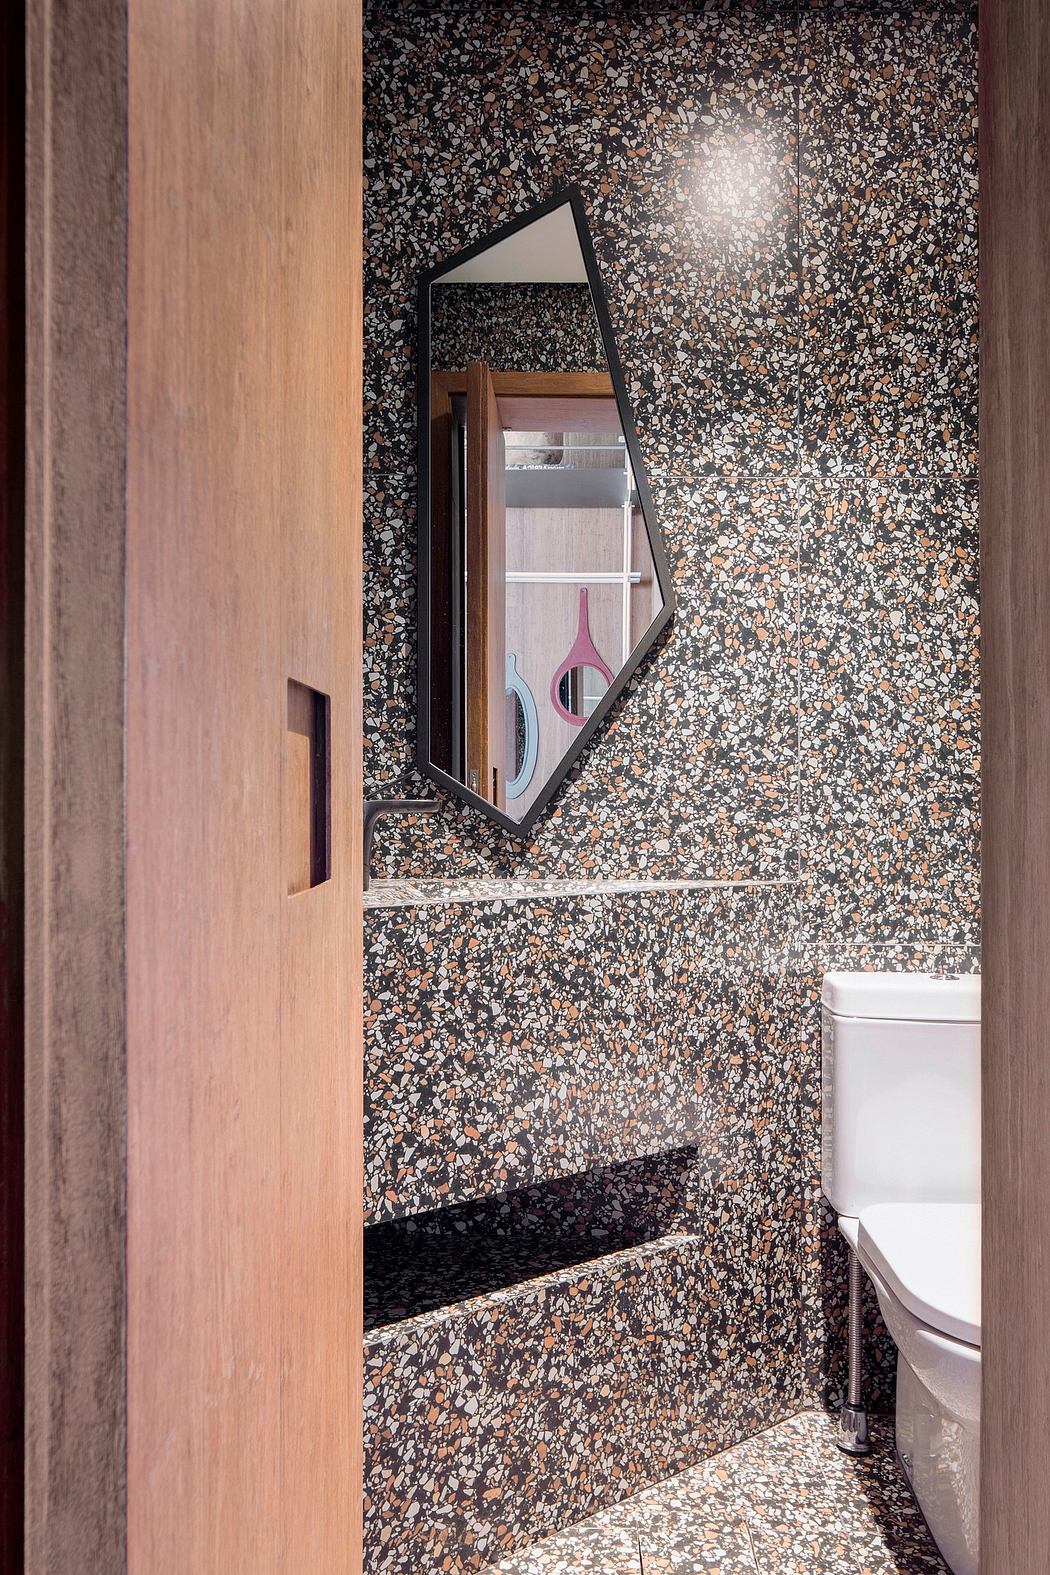 Eclectic bathroom design featuring a modern mirror and textured terrazzo walls.